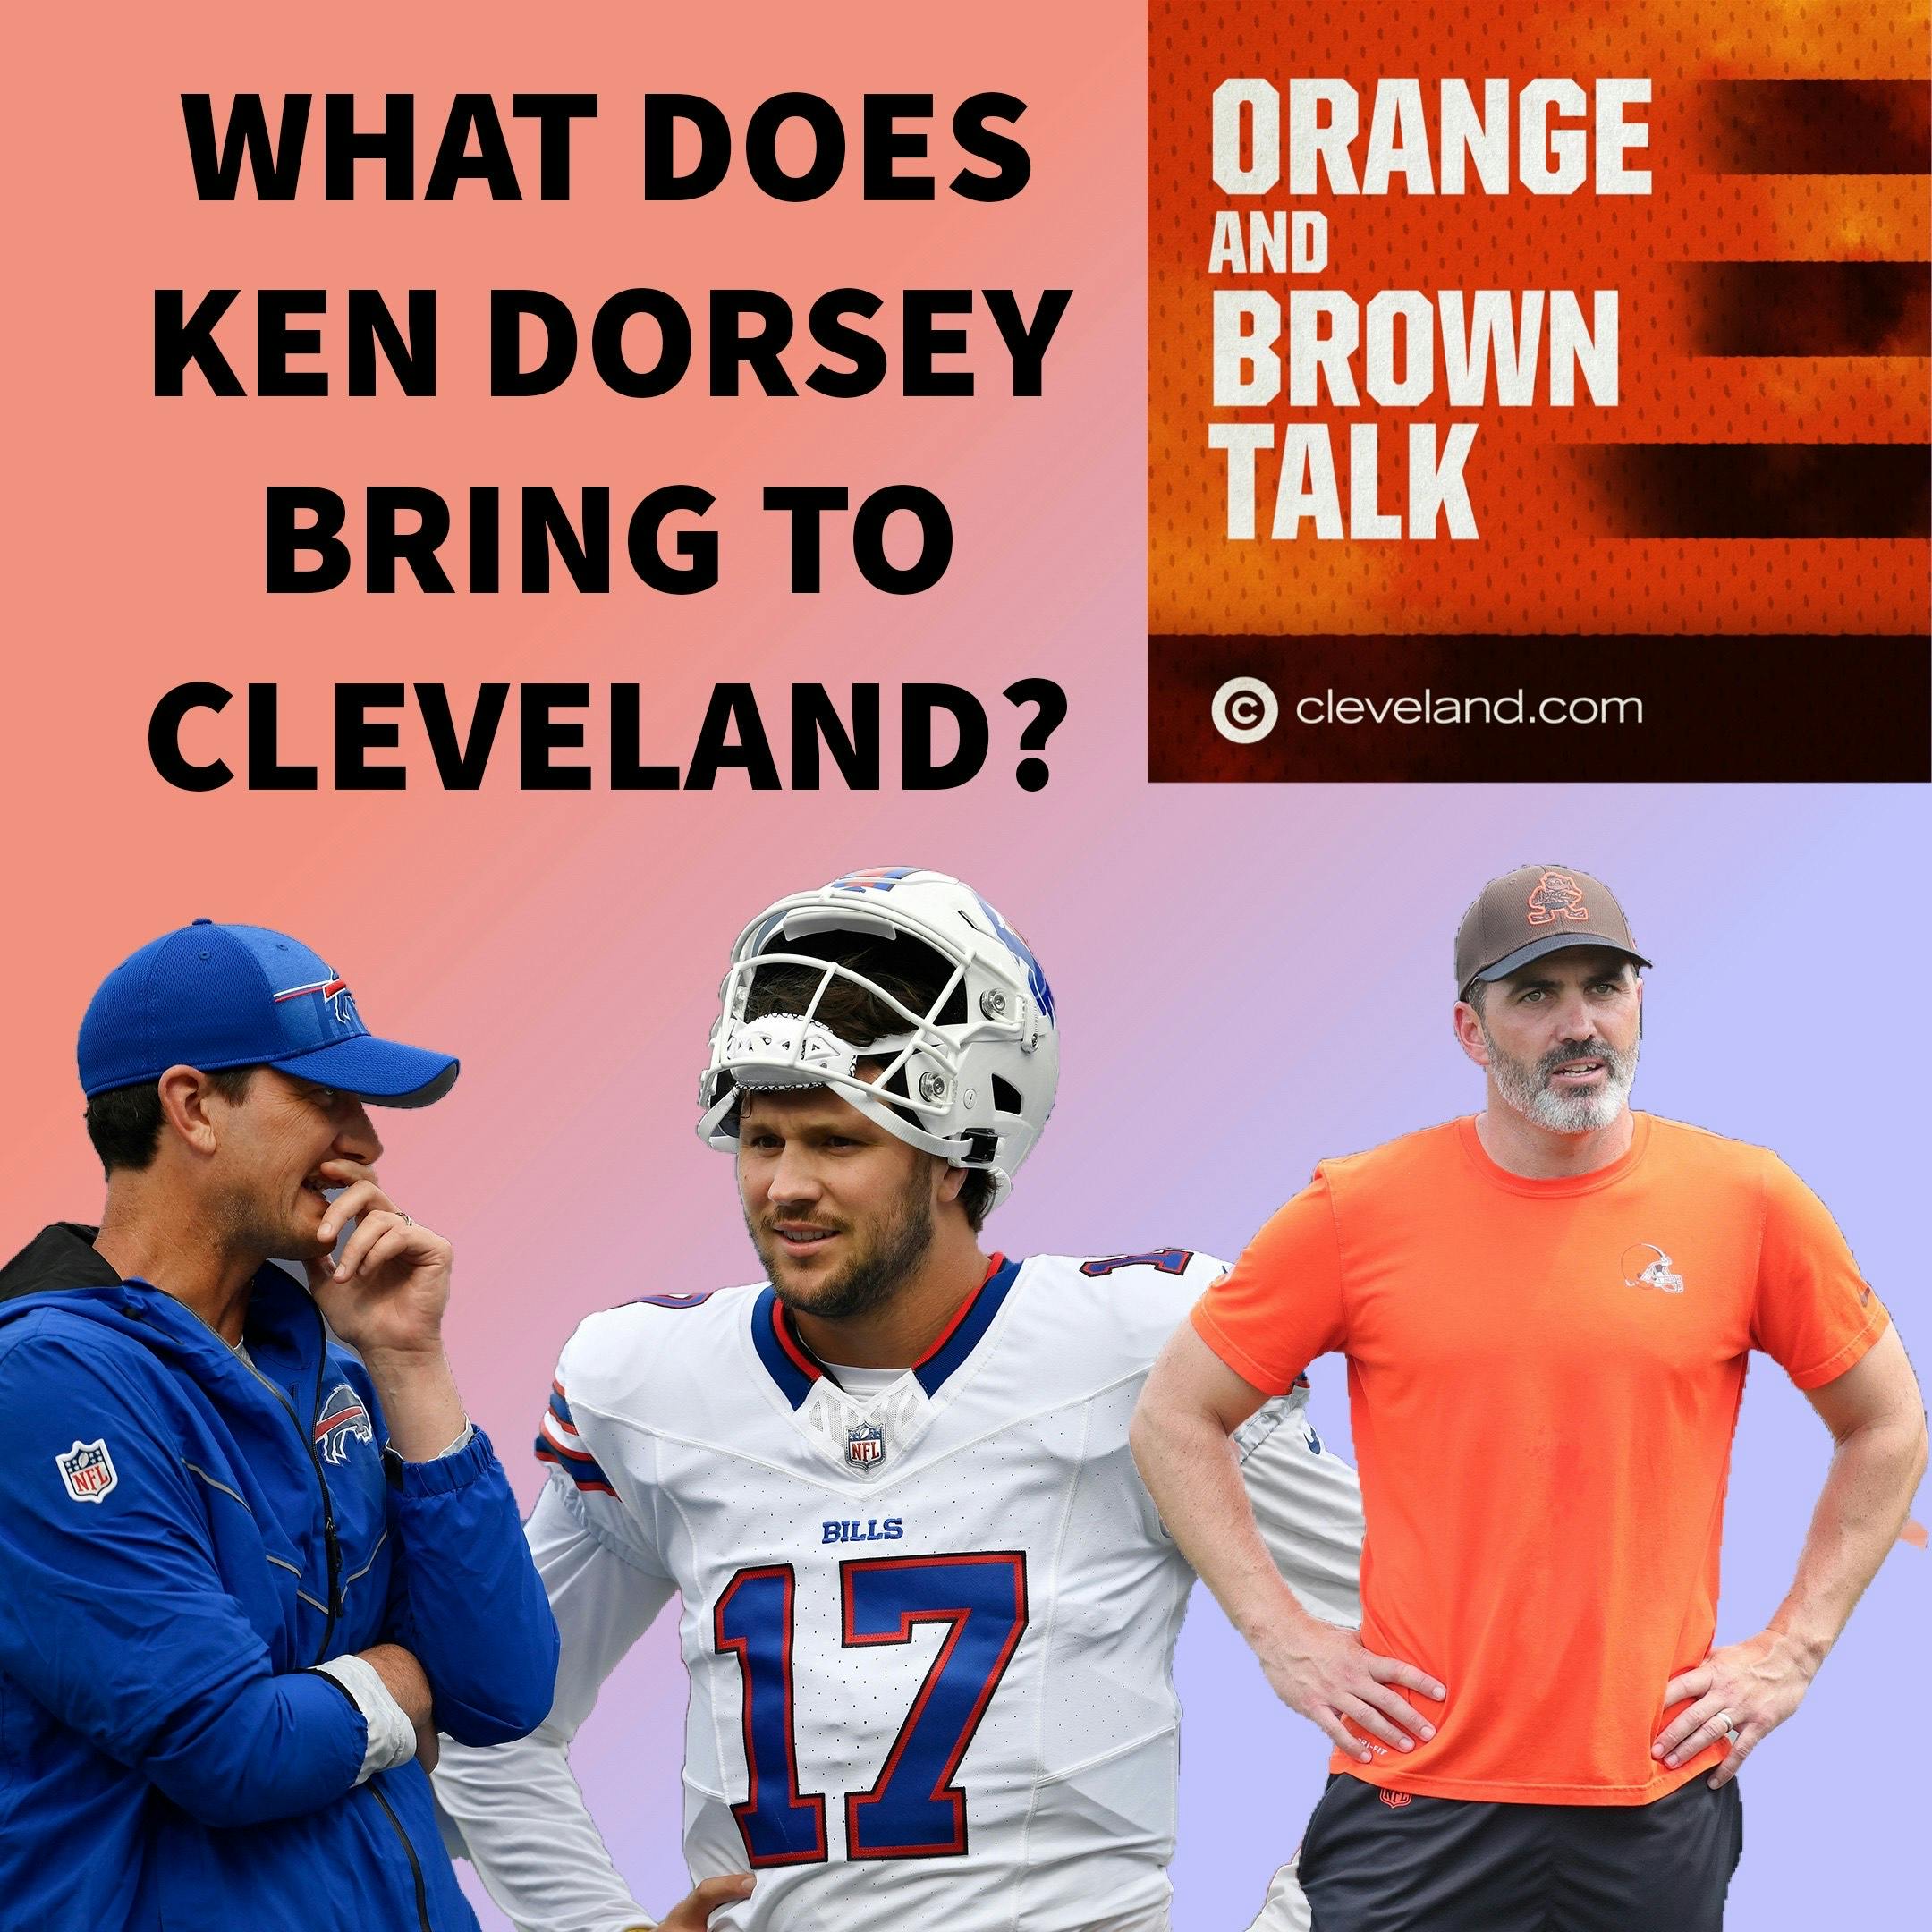 What is Ken Dorsey bringing to Cleveland? What happened in Buffalo?